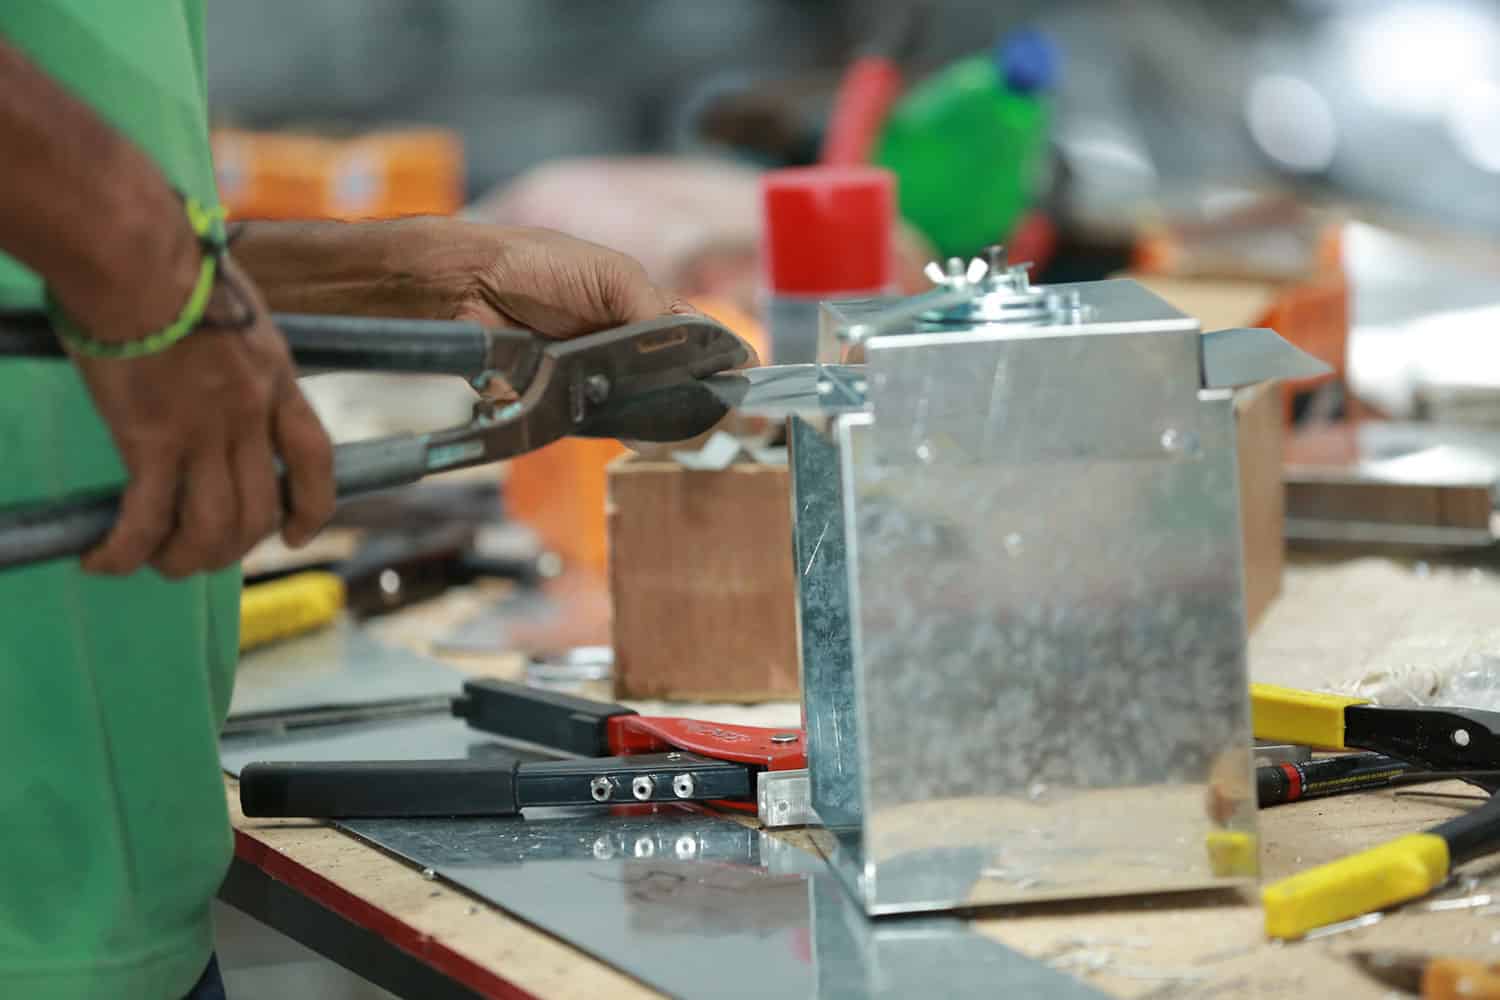 A man working on a work bench with tools